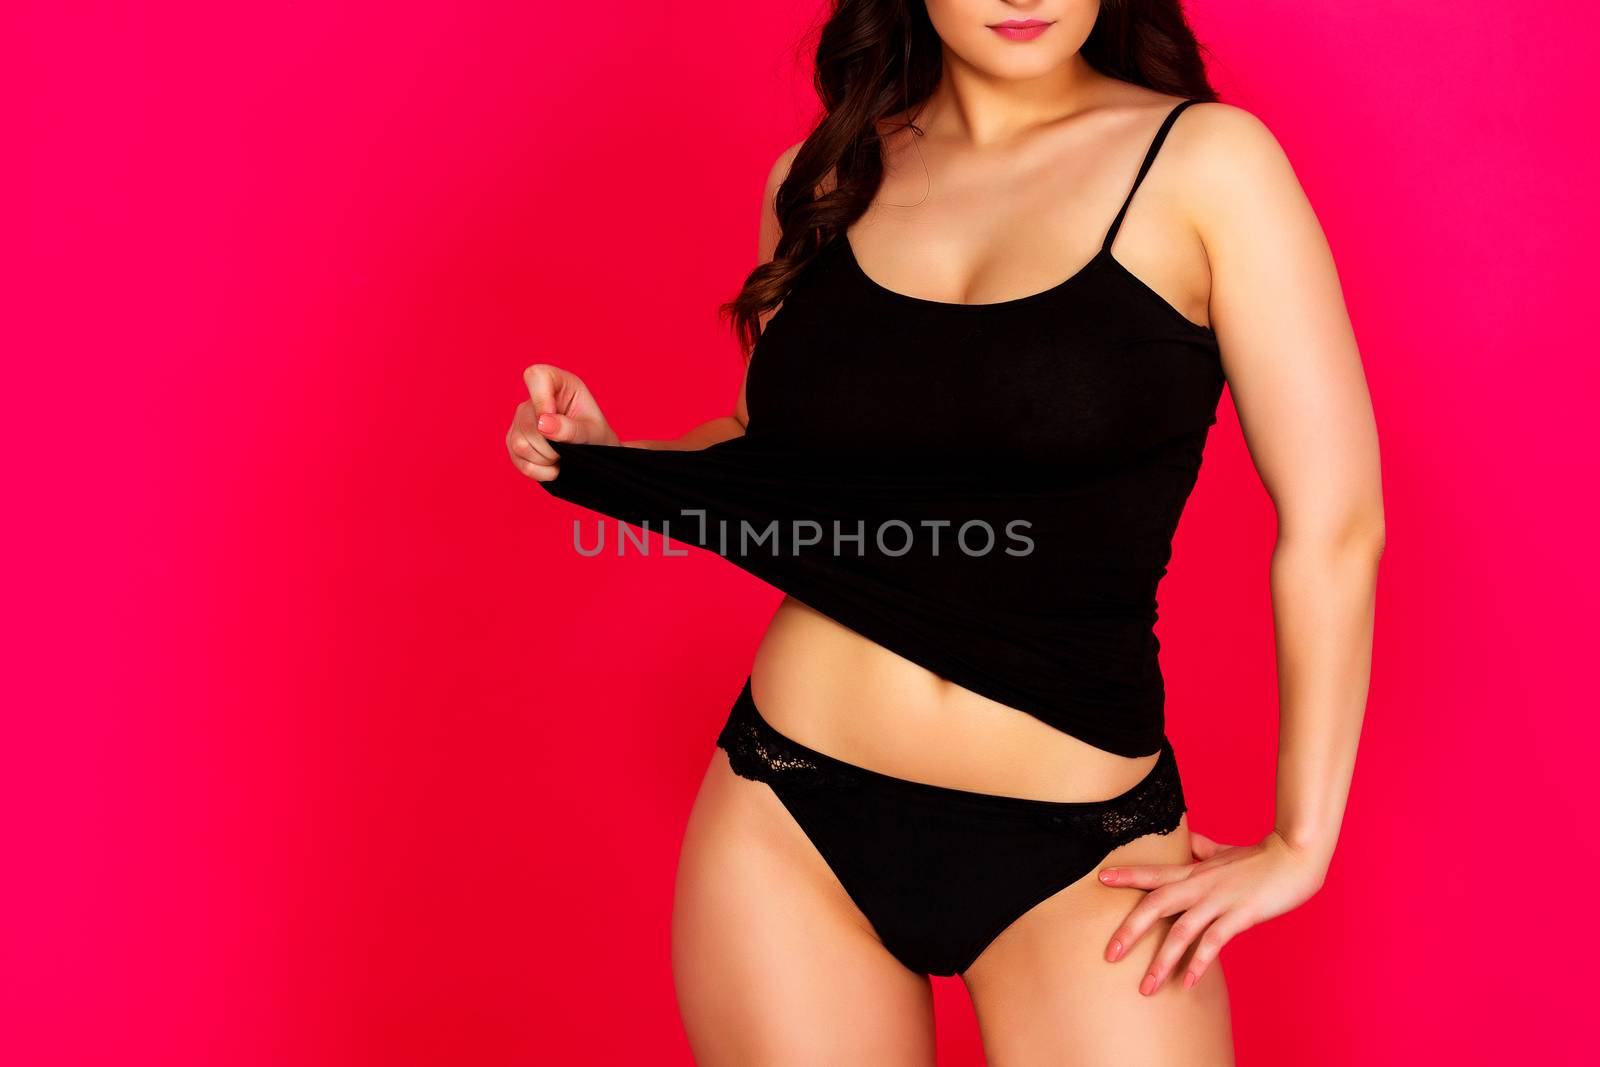 Woman with sexy body posing against a red background